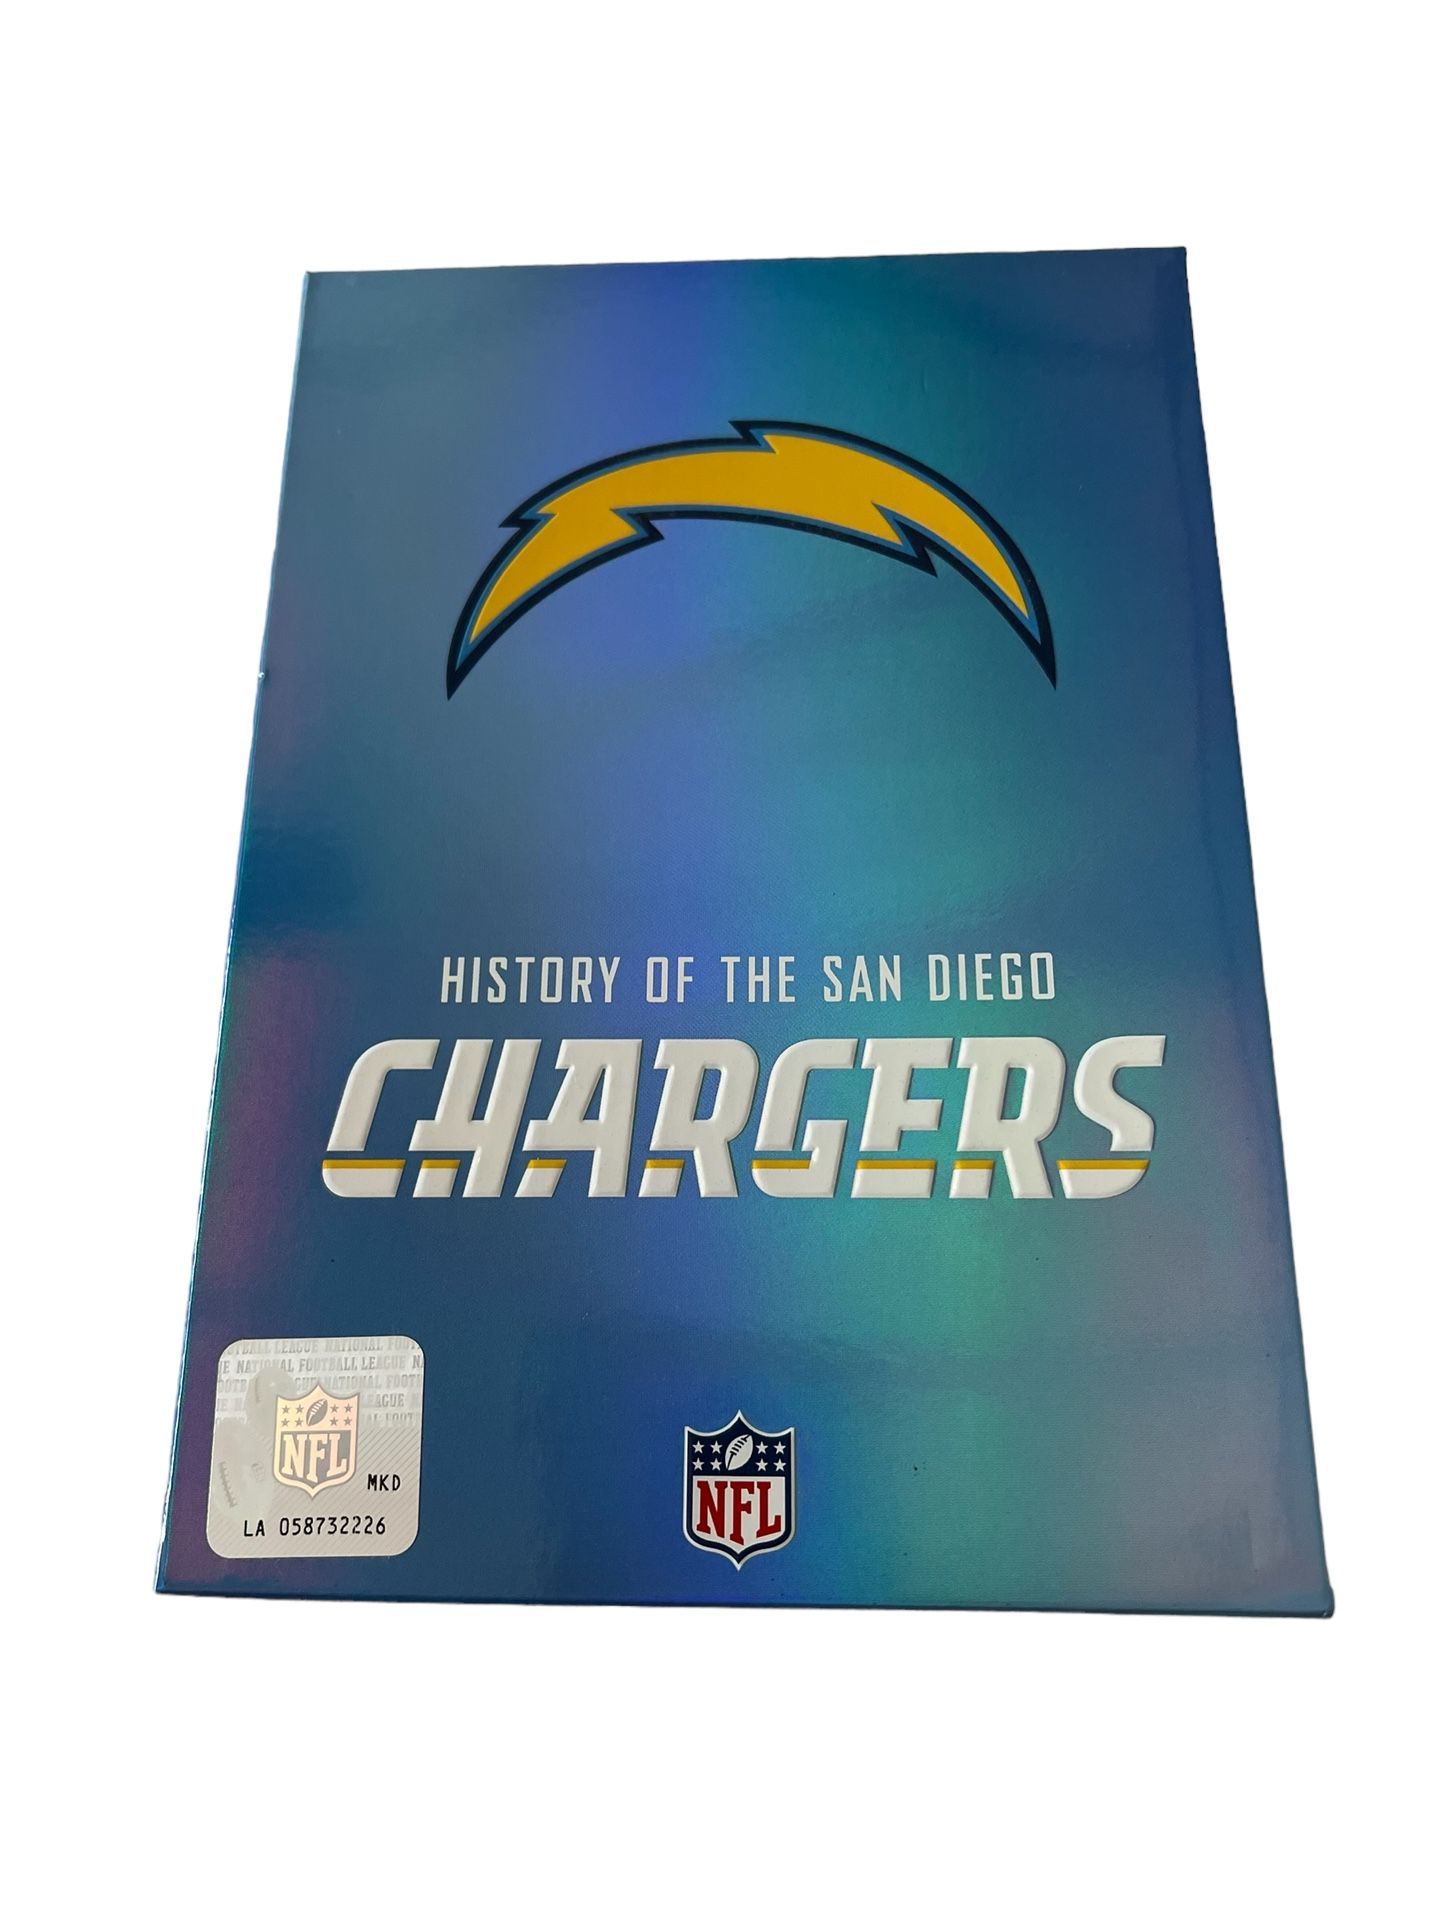 NFL: History of the San Diego Chargers DVD 2011  This DVD is a must-have for any NFL fan who wants to learn about the history of the San Diego Charger